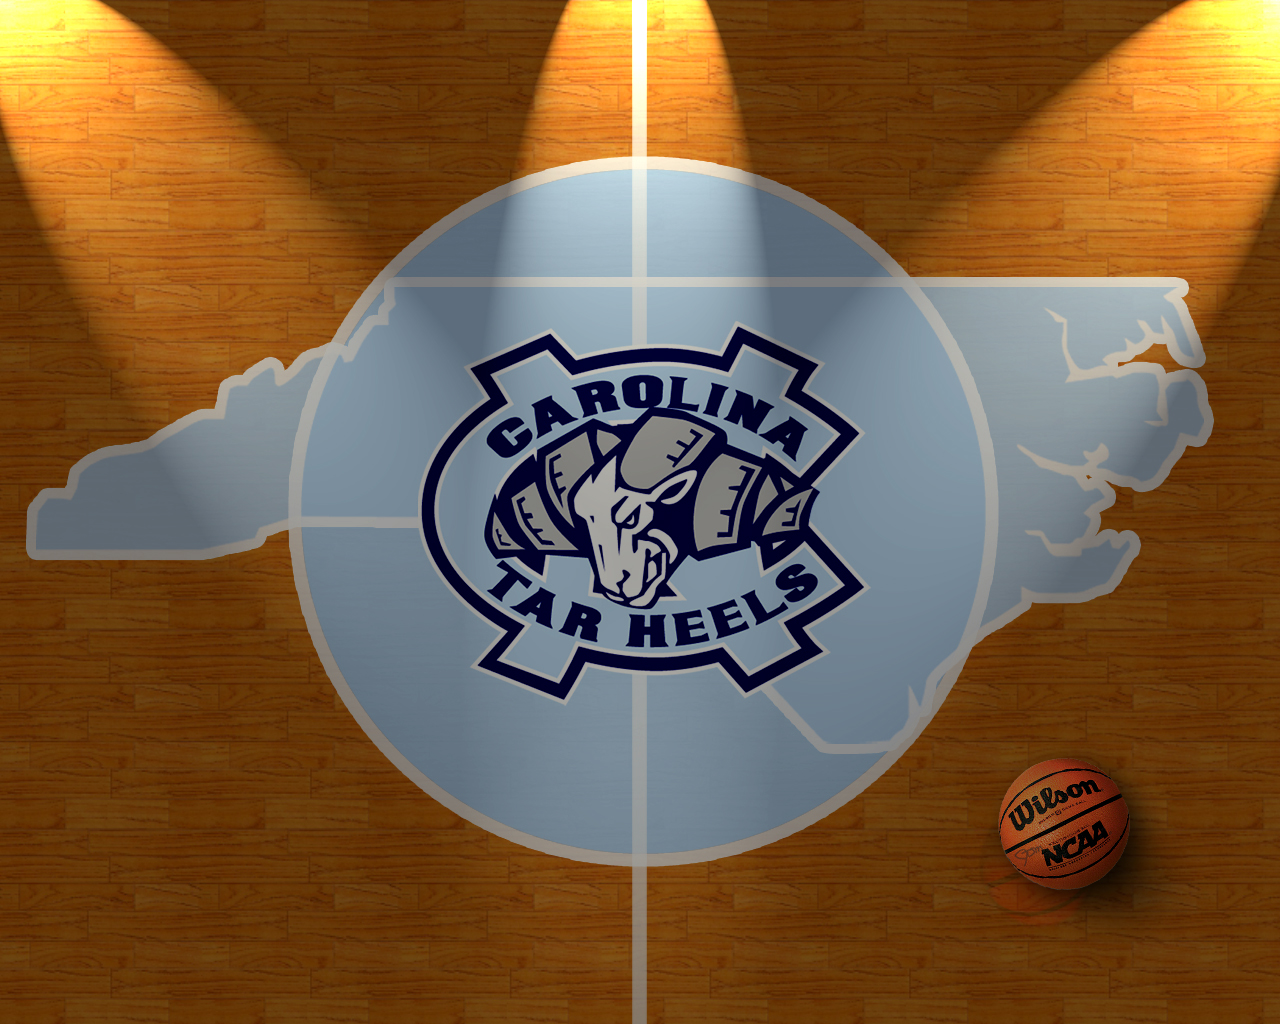 What to expect from the 2012 2013 North Carolina Tarheels 1280x1024